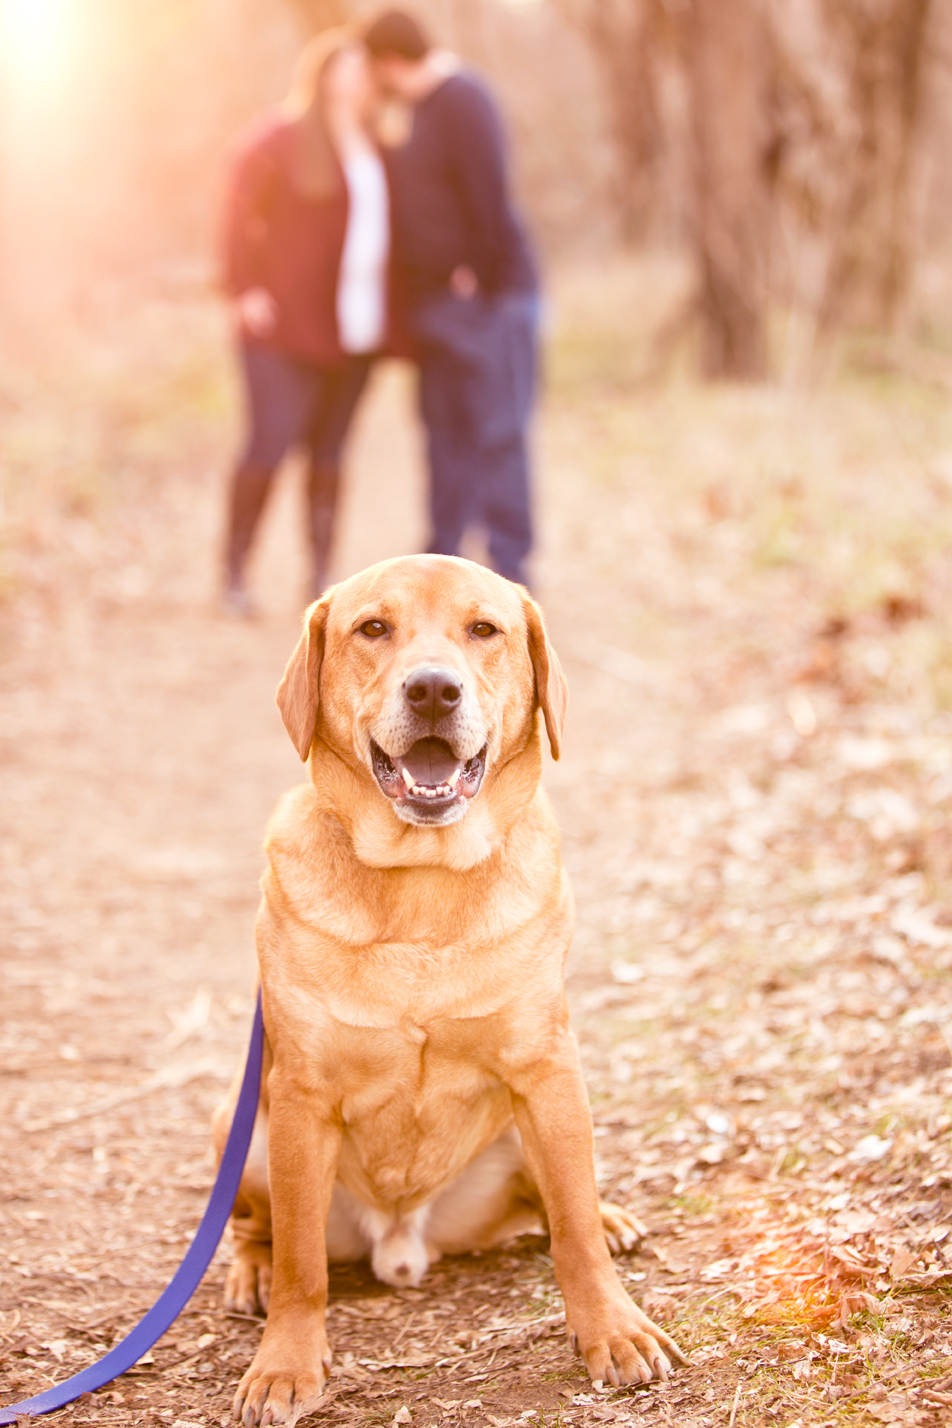 Tips For Including Your Dog in Your Engagement Photos - Image Property of www.j-dphoto.com